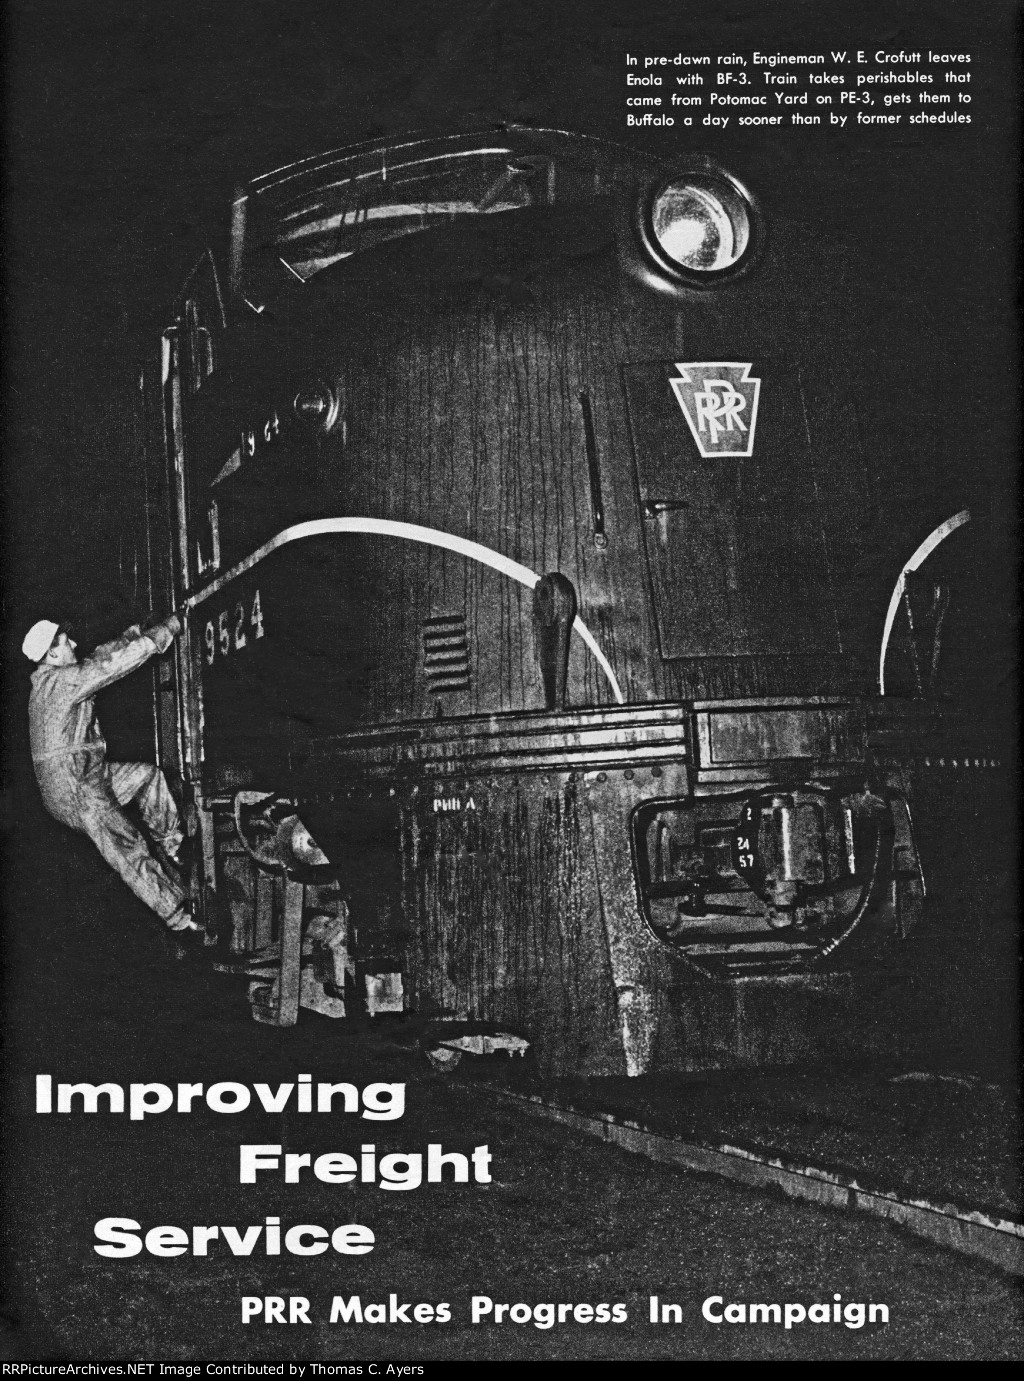 "Improving Freight Service," Page 8, 1957